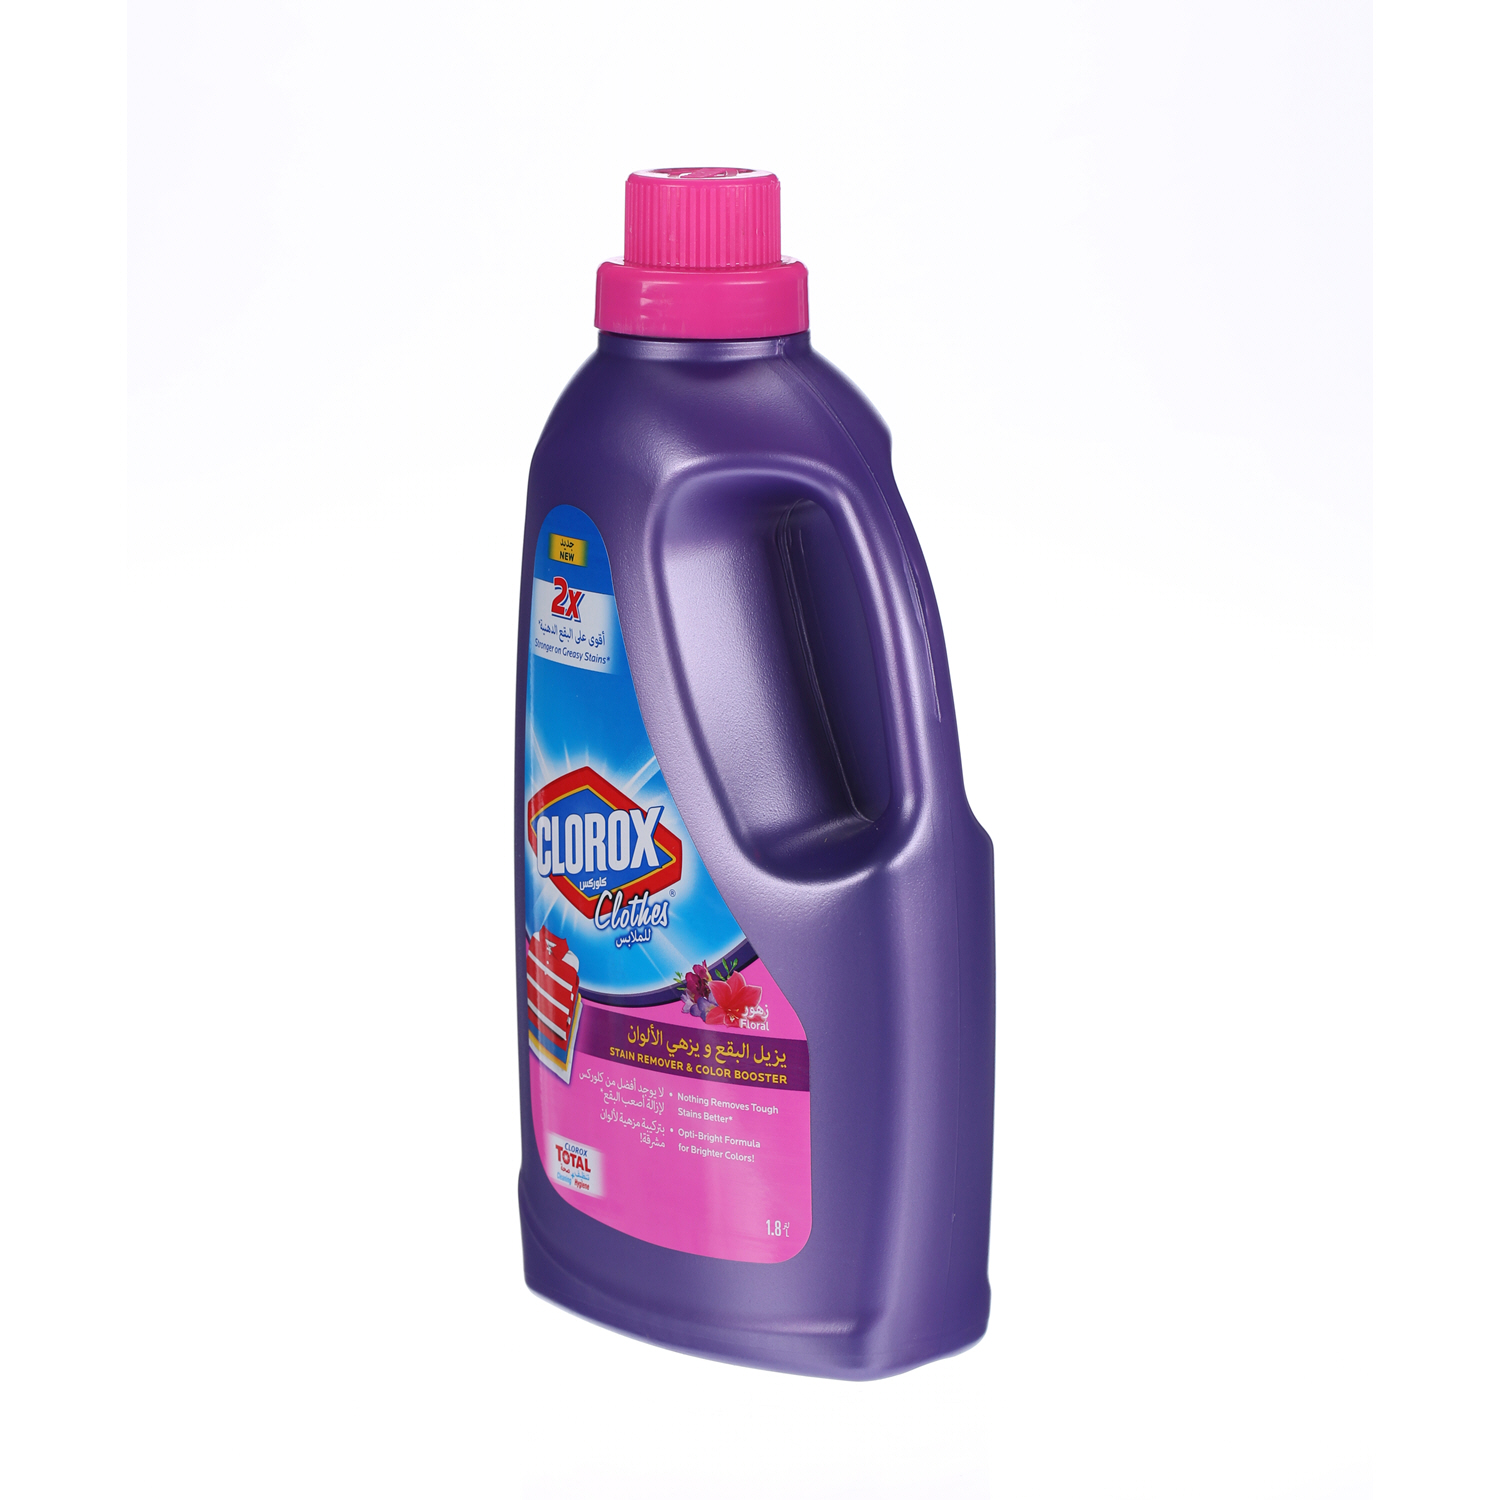 Clorox Stain Remover Color & Color Booster for Clothes 1.8 L